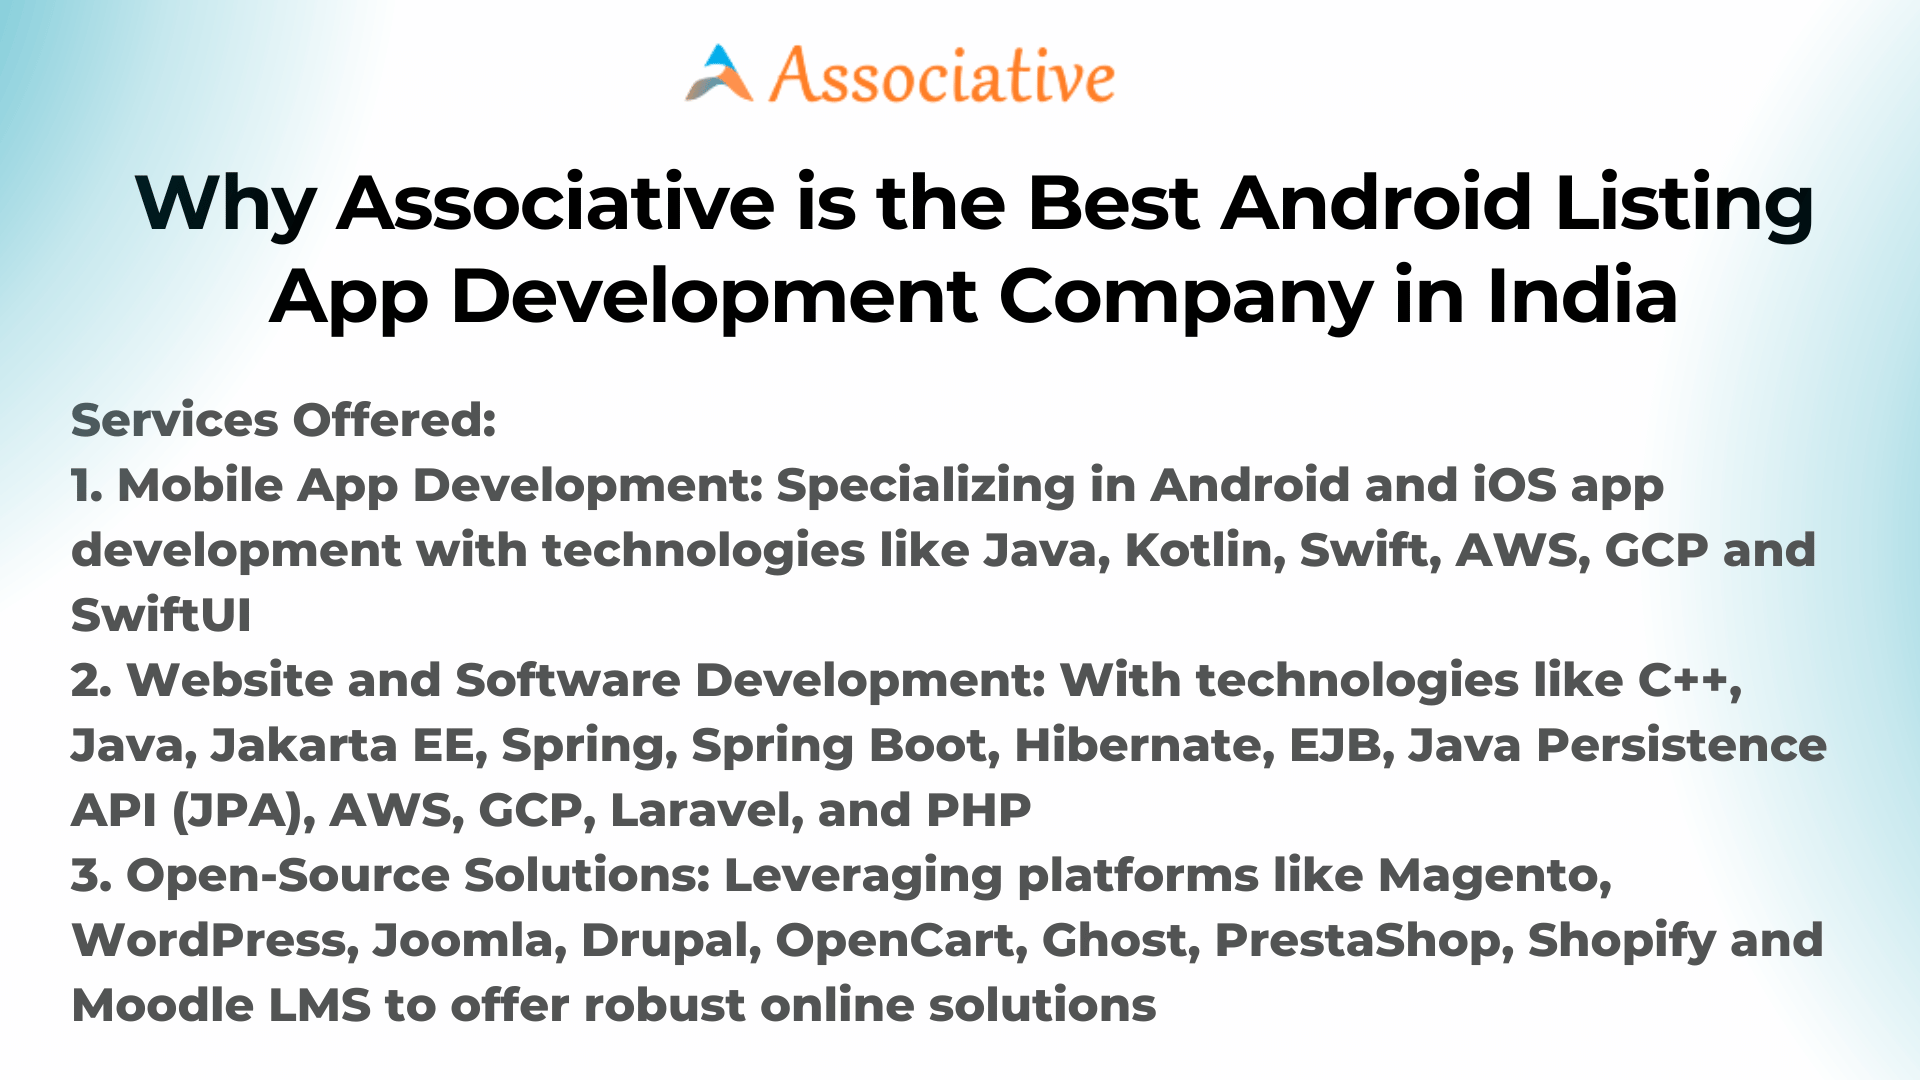 Why Associative is the Best Android Listing App Development Company in India